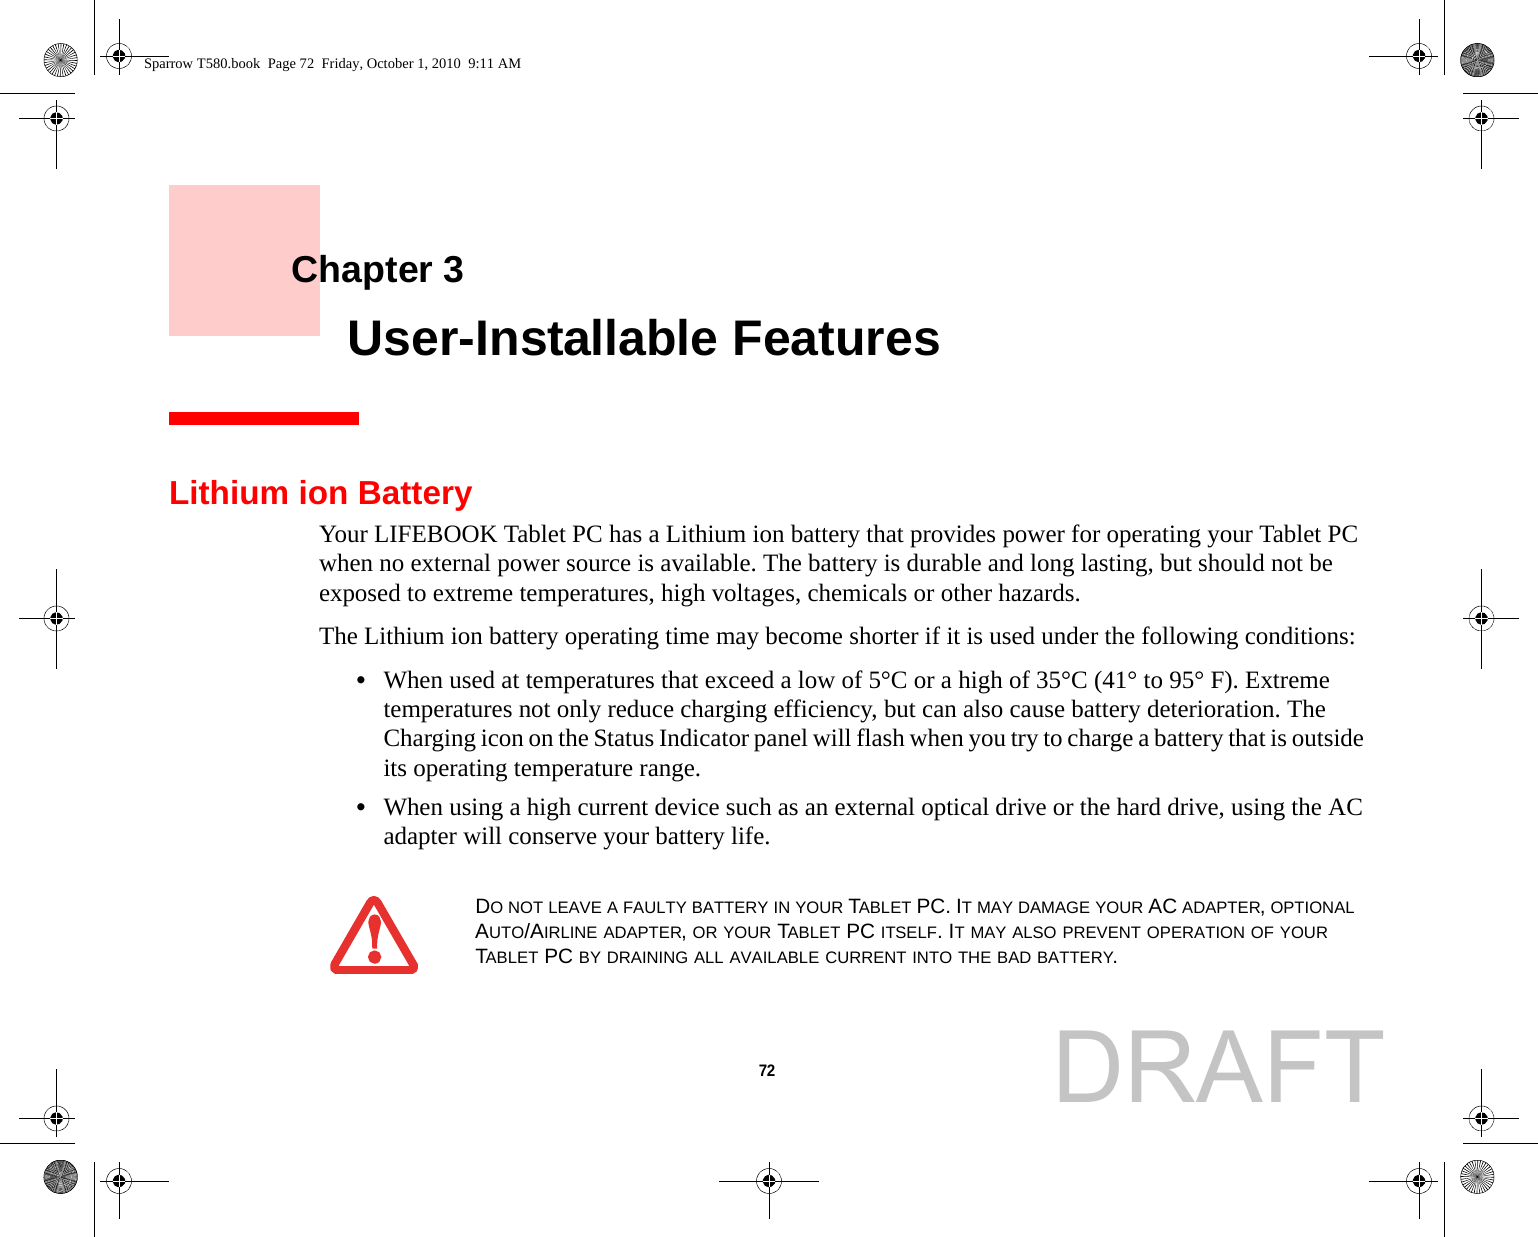 72     Chapter 3    User-Installable FeaturesLithium ion BatteryYour LIFEBOOK Tablet PC has a Lithium ion battery that provides power for operating your Tablet PC when no external power source is available. The battery is durable and long lasting, but should not be exposed to extreme temperatures, high voltages, chemicals or other hazards.The Lithium ion battery operating time may become shorter if it is used under the following conditions:•When used at temperatures that exceed a low of 5°C or a high of 35°C (41° to 95° F). Extreme temperatures not only reduce charging efficiency, but can also cause battery deterioration. The Charging icon on the Status Indicator panel will flash when you try to charge a battery that is outside its operating temperature range. •When using a high current device such as an external optical drive or the hard drive, using the AC adapter will conserve your battery life.DO NOT LEAVE A FAULTY BATTERY IN YOUR TABLET PC. IT MAY DAMAGE YOUR AC ADAPTER, OPTIONAL AUTO/AIRLINE ADAPTER, OR YOUR TABLET PC ITSELF. IT MAY ALSO PREVENT OPERATION OF YOUR TABLET PC BY DRAINING ALL AVAILABLE CURRENT INTO THE BAD BATTERY.Sparrow T580.book  Page 72  Friday, October 1, 2010  9:11 AMDRAFT